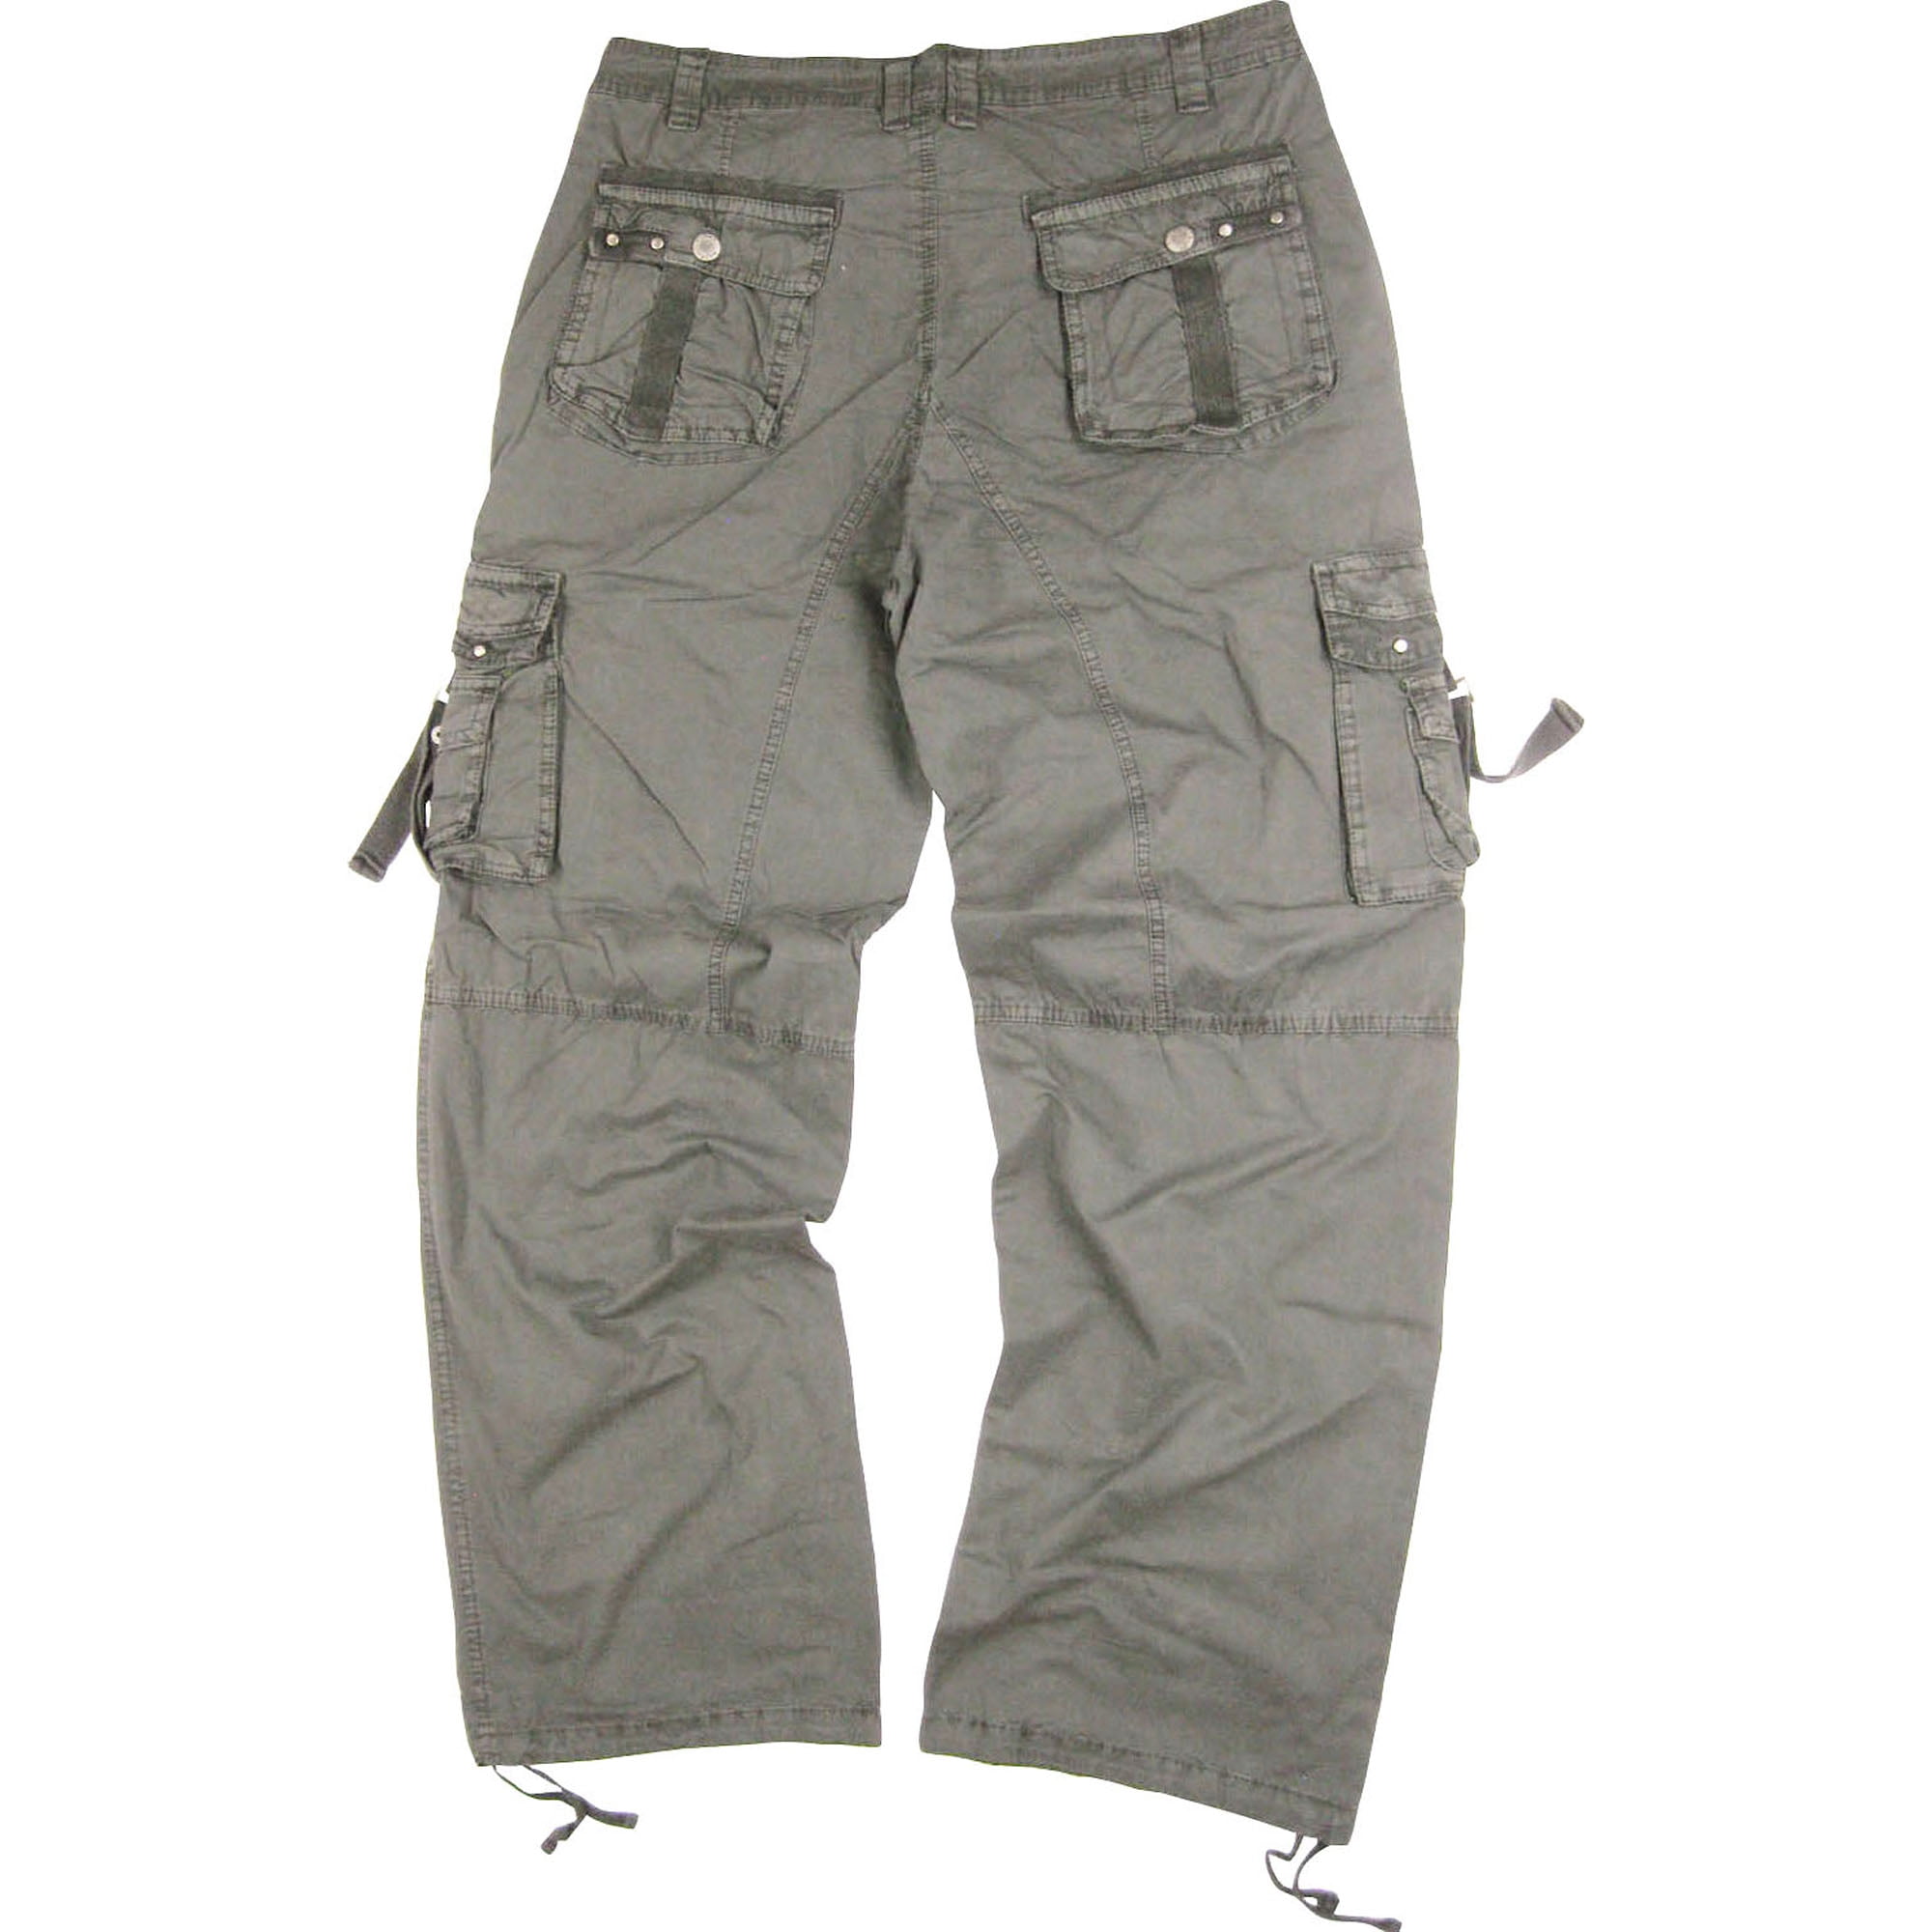 StoneTouch Men's Military-Style Cargo Pants.Have Many Pockets A8 